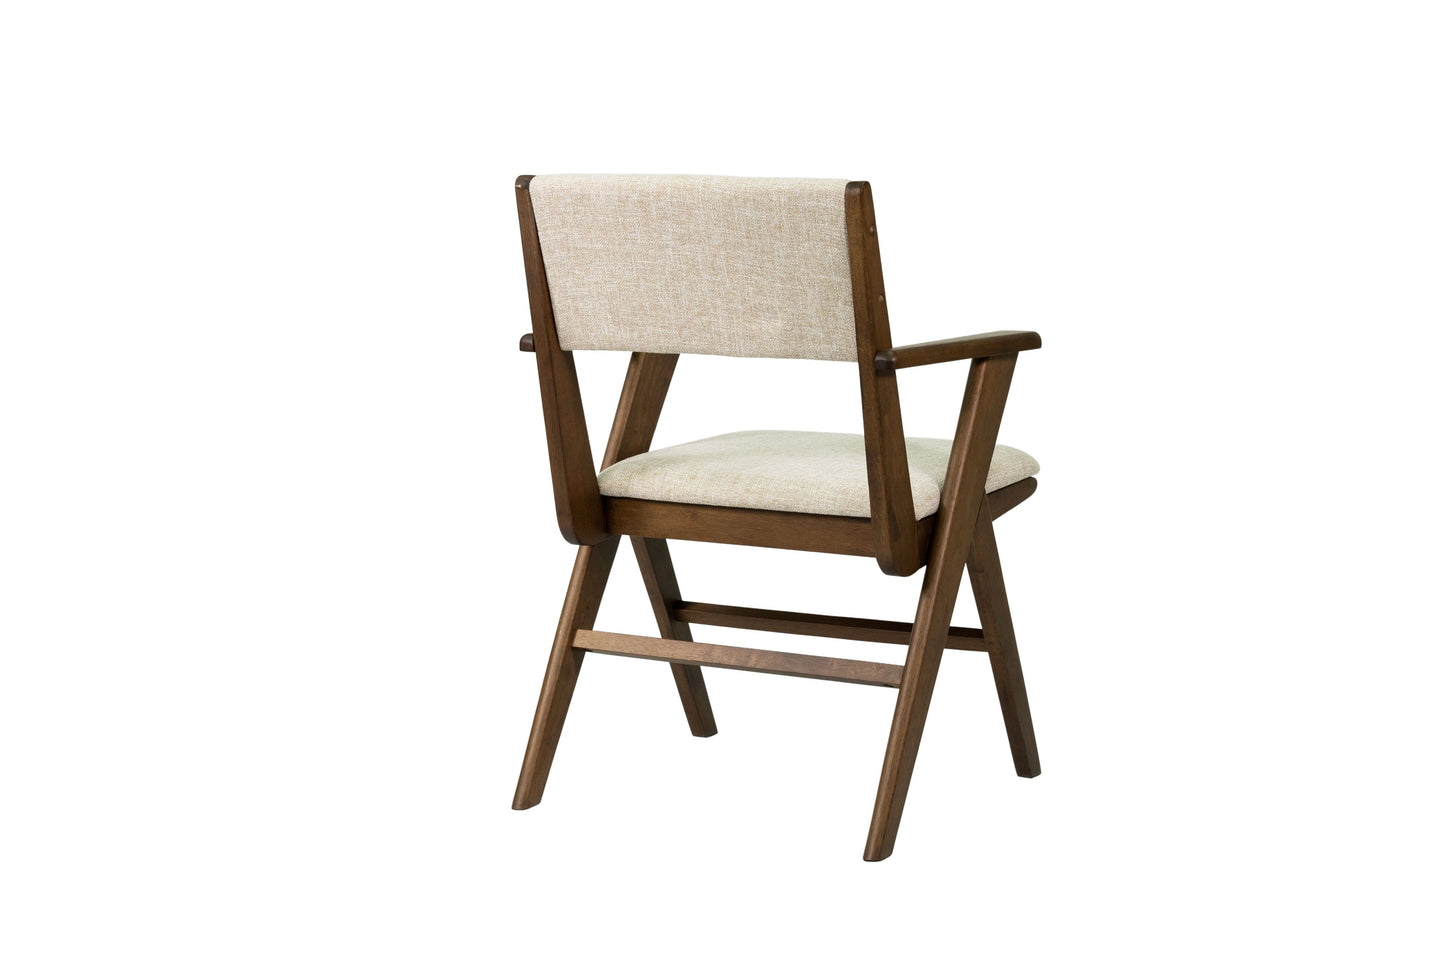 Cosy Dining Chairs (Set of 2)